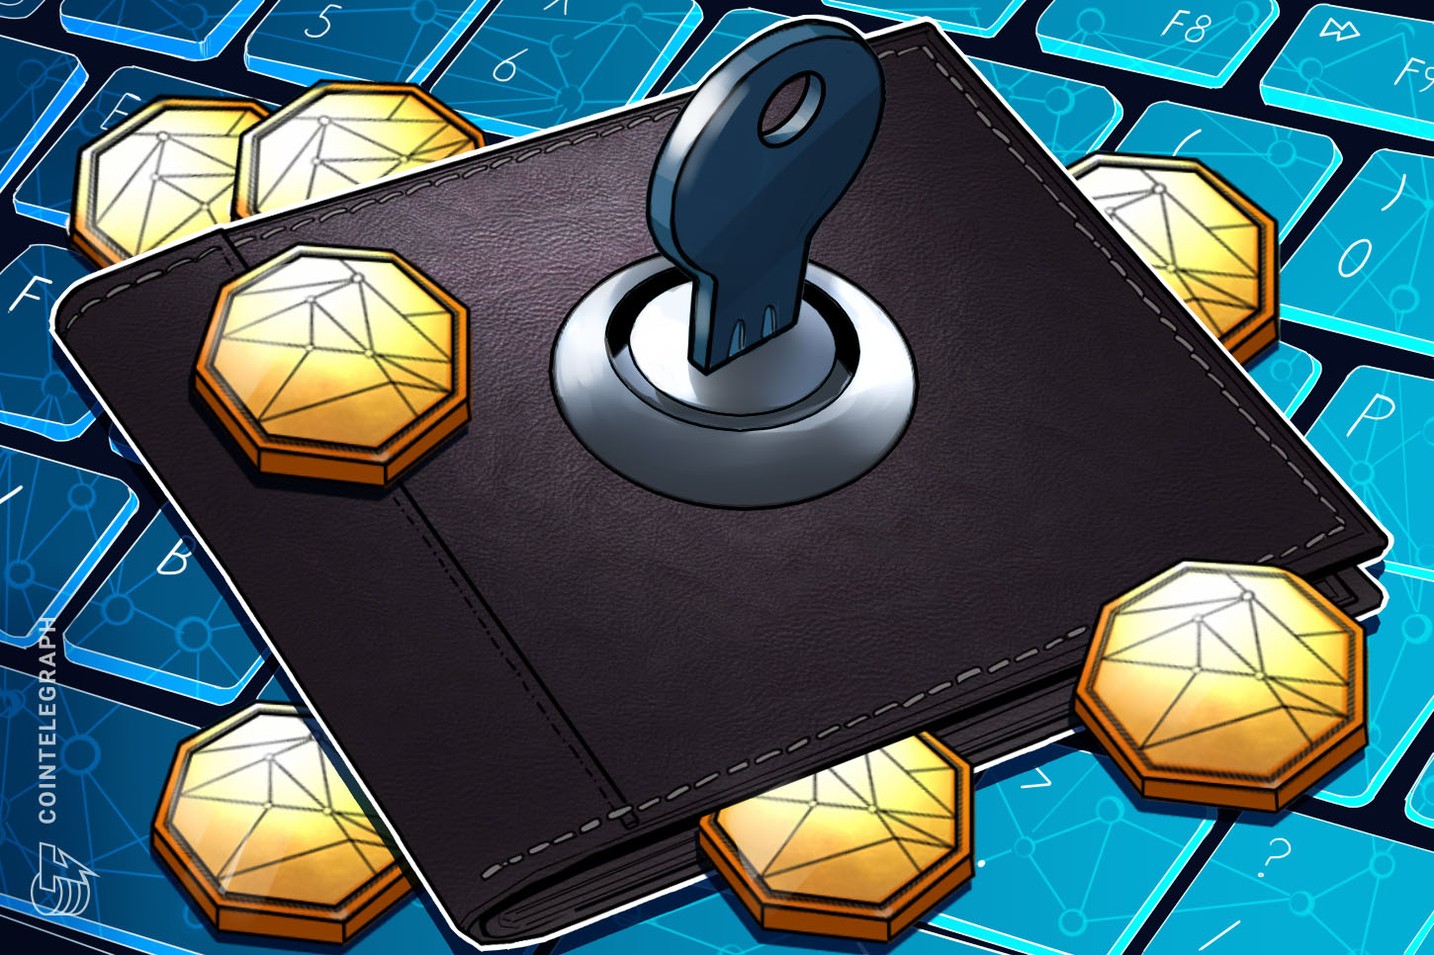 Trezor wallet enables Bitcoin privacy feature with CoinJoin